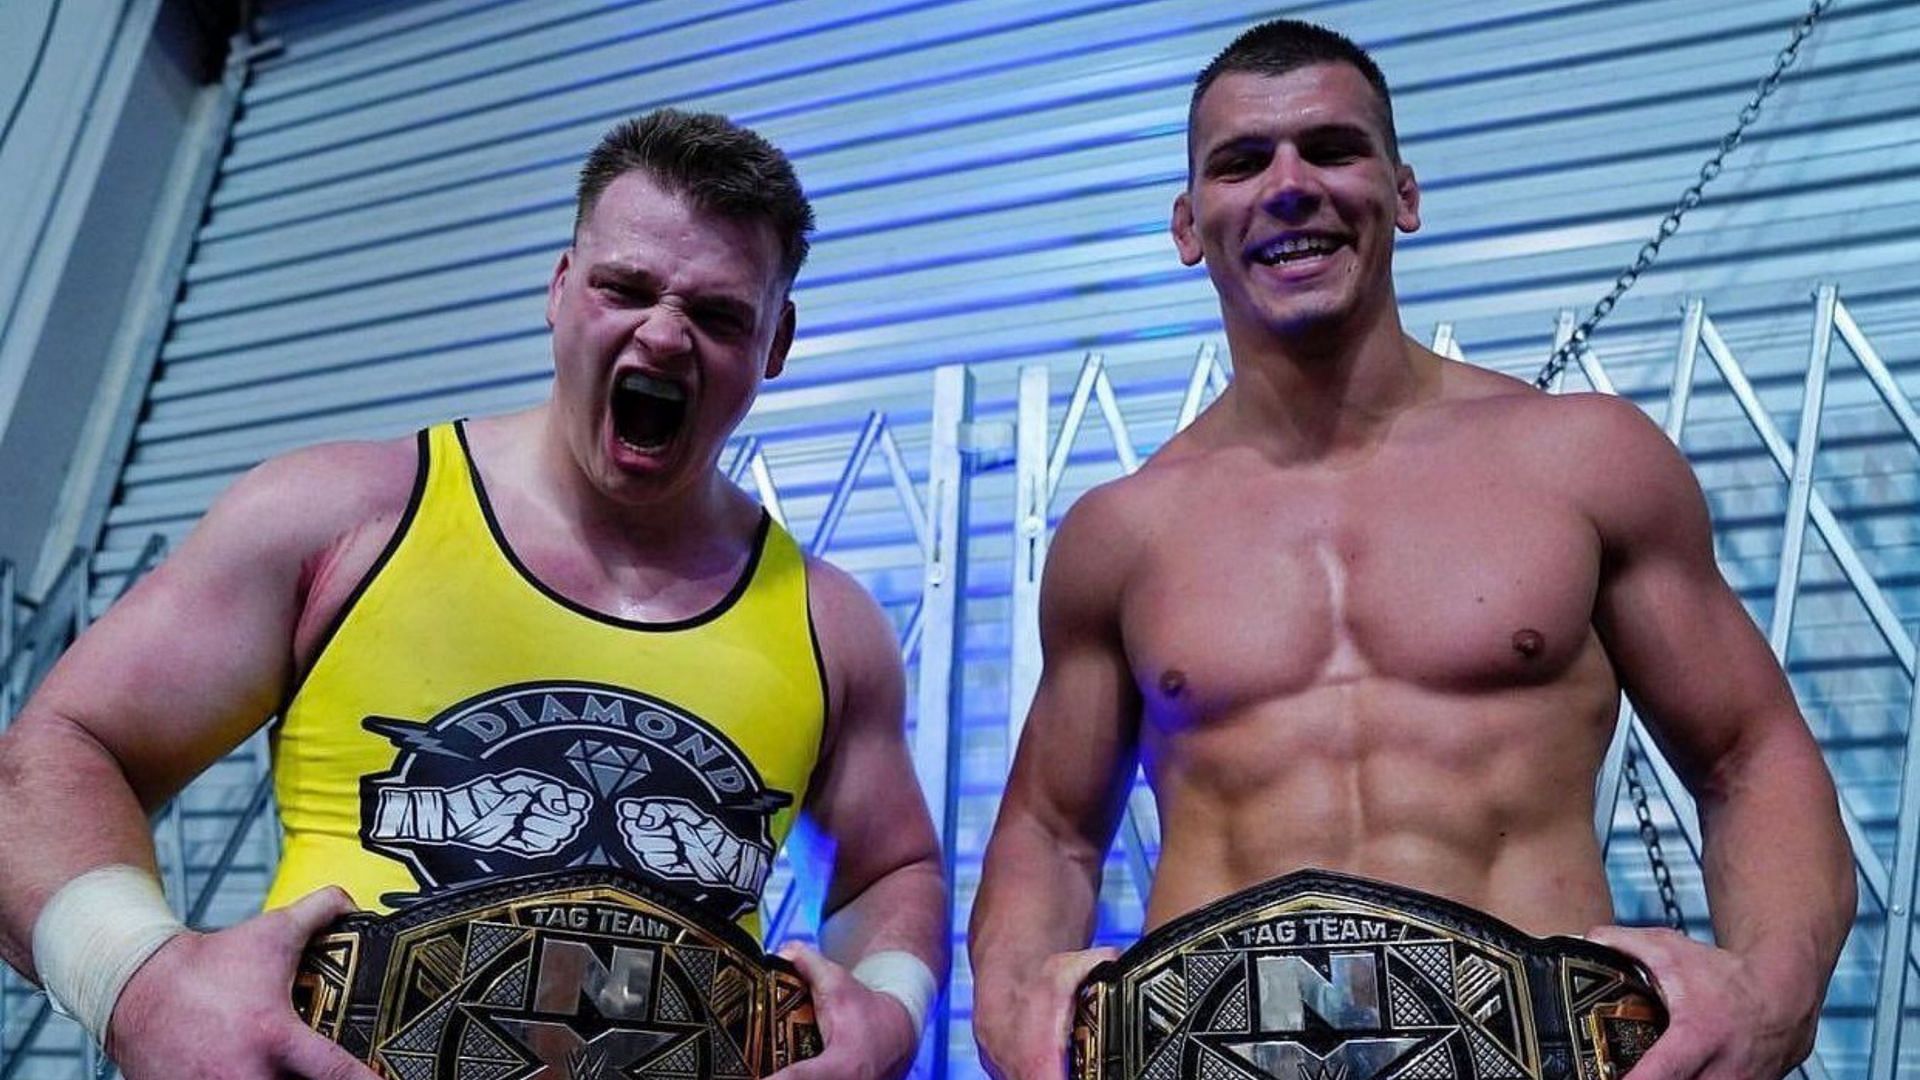 The Creed Brothers are the NXT Tag Team Champions